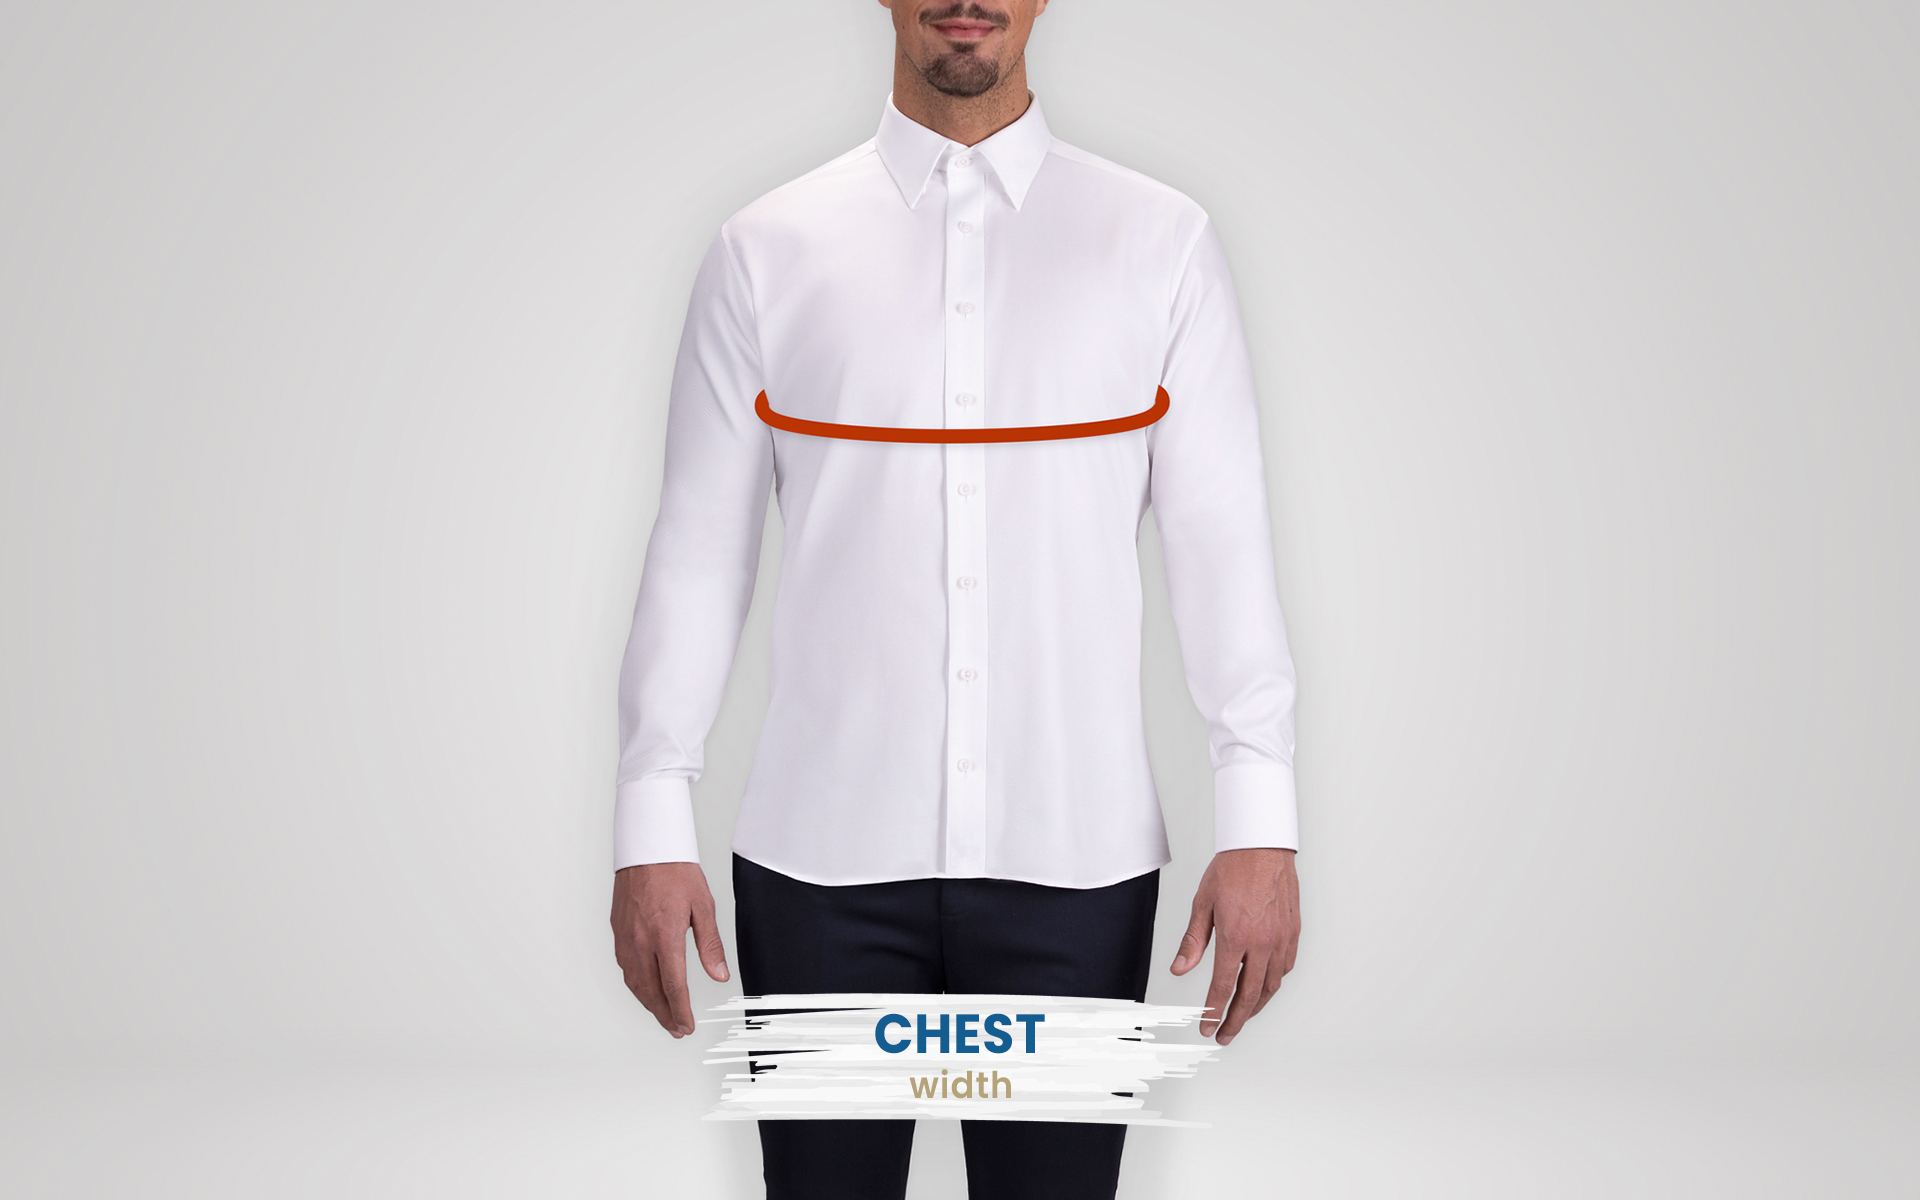 how to measure suit's chest width